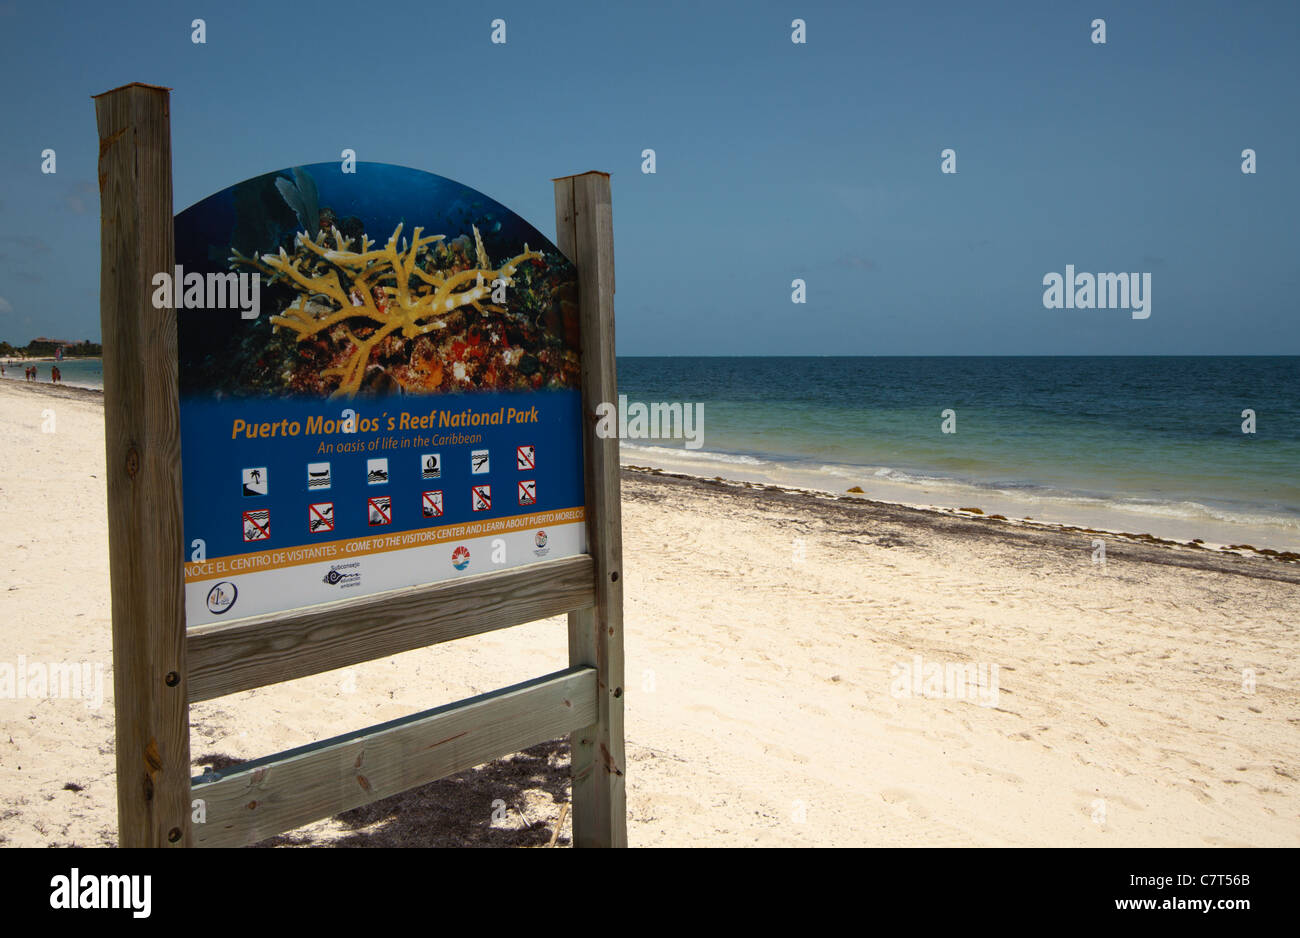 Puerto Morelos Reef National Park  sign Stock Photo